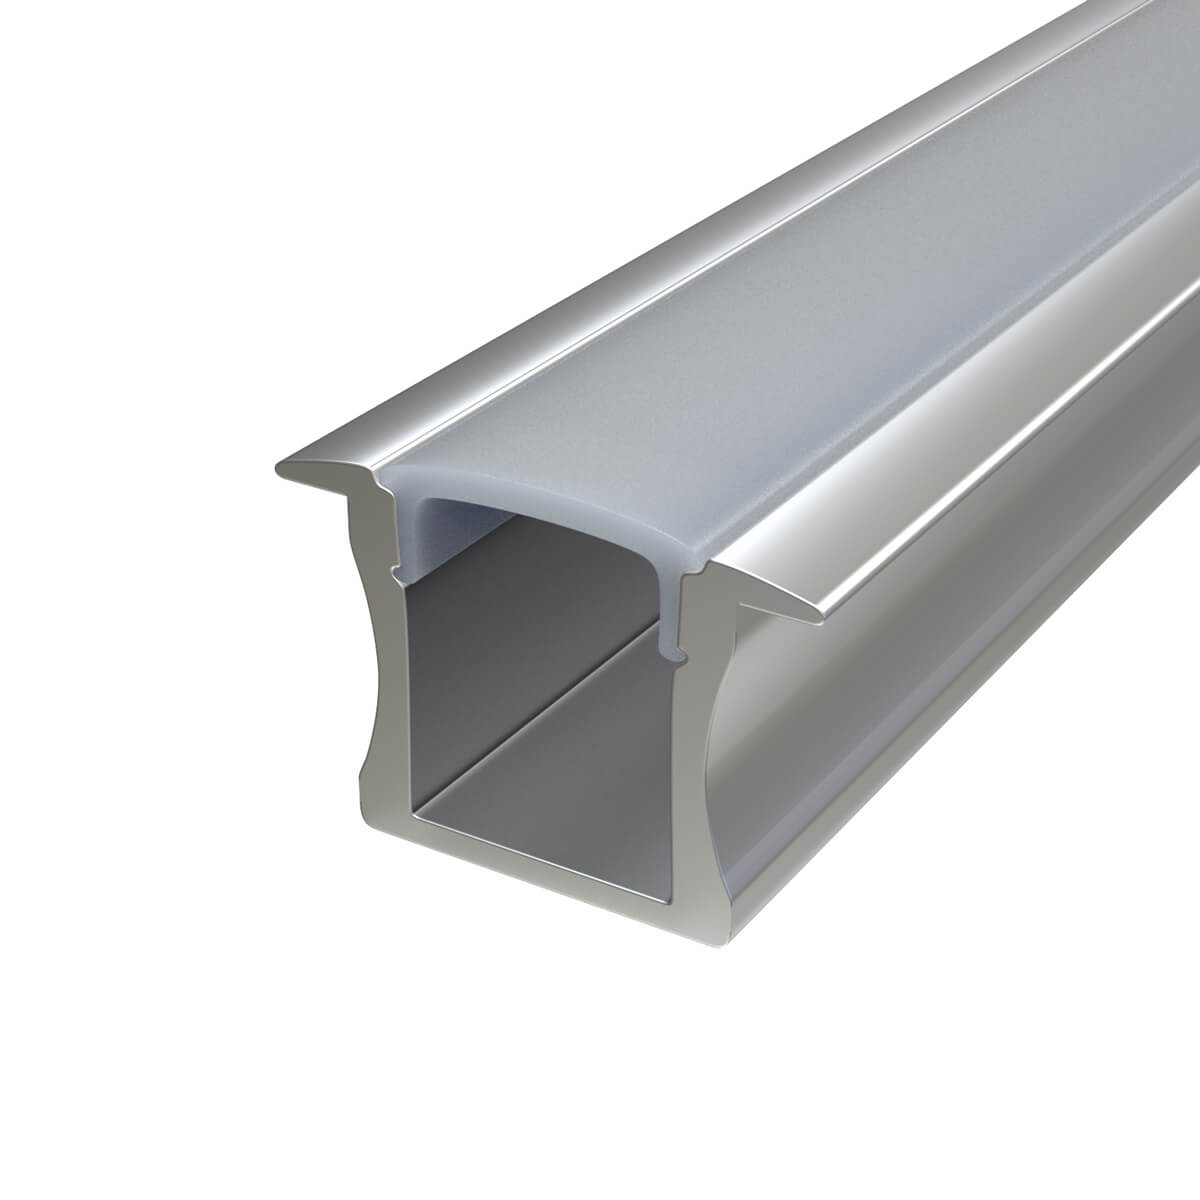 View 1m Recess Mounted Aluminium LED Profile Extrusion for all types of LED Tape information